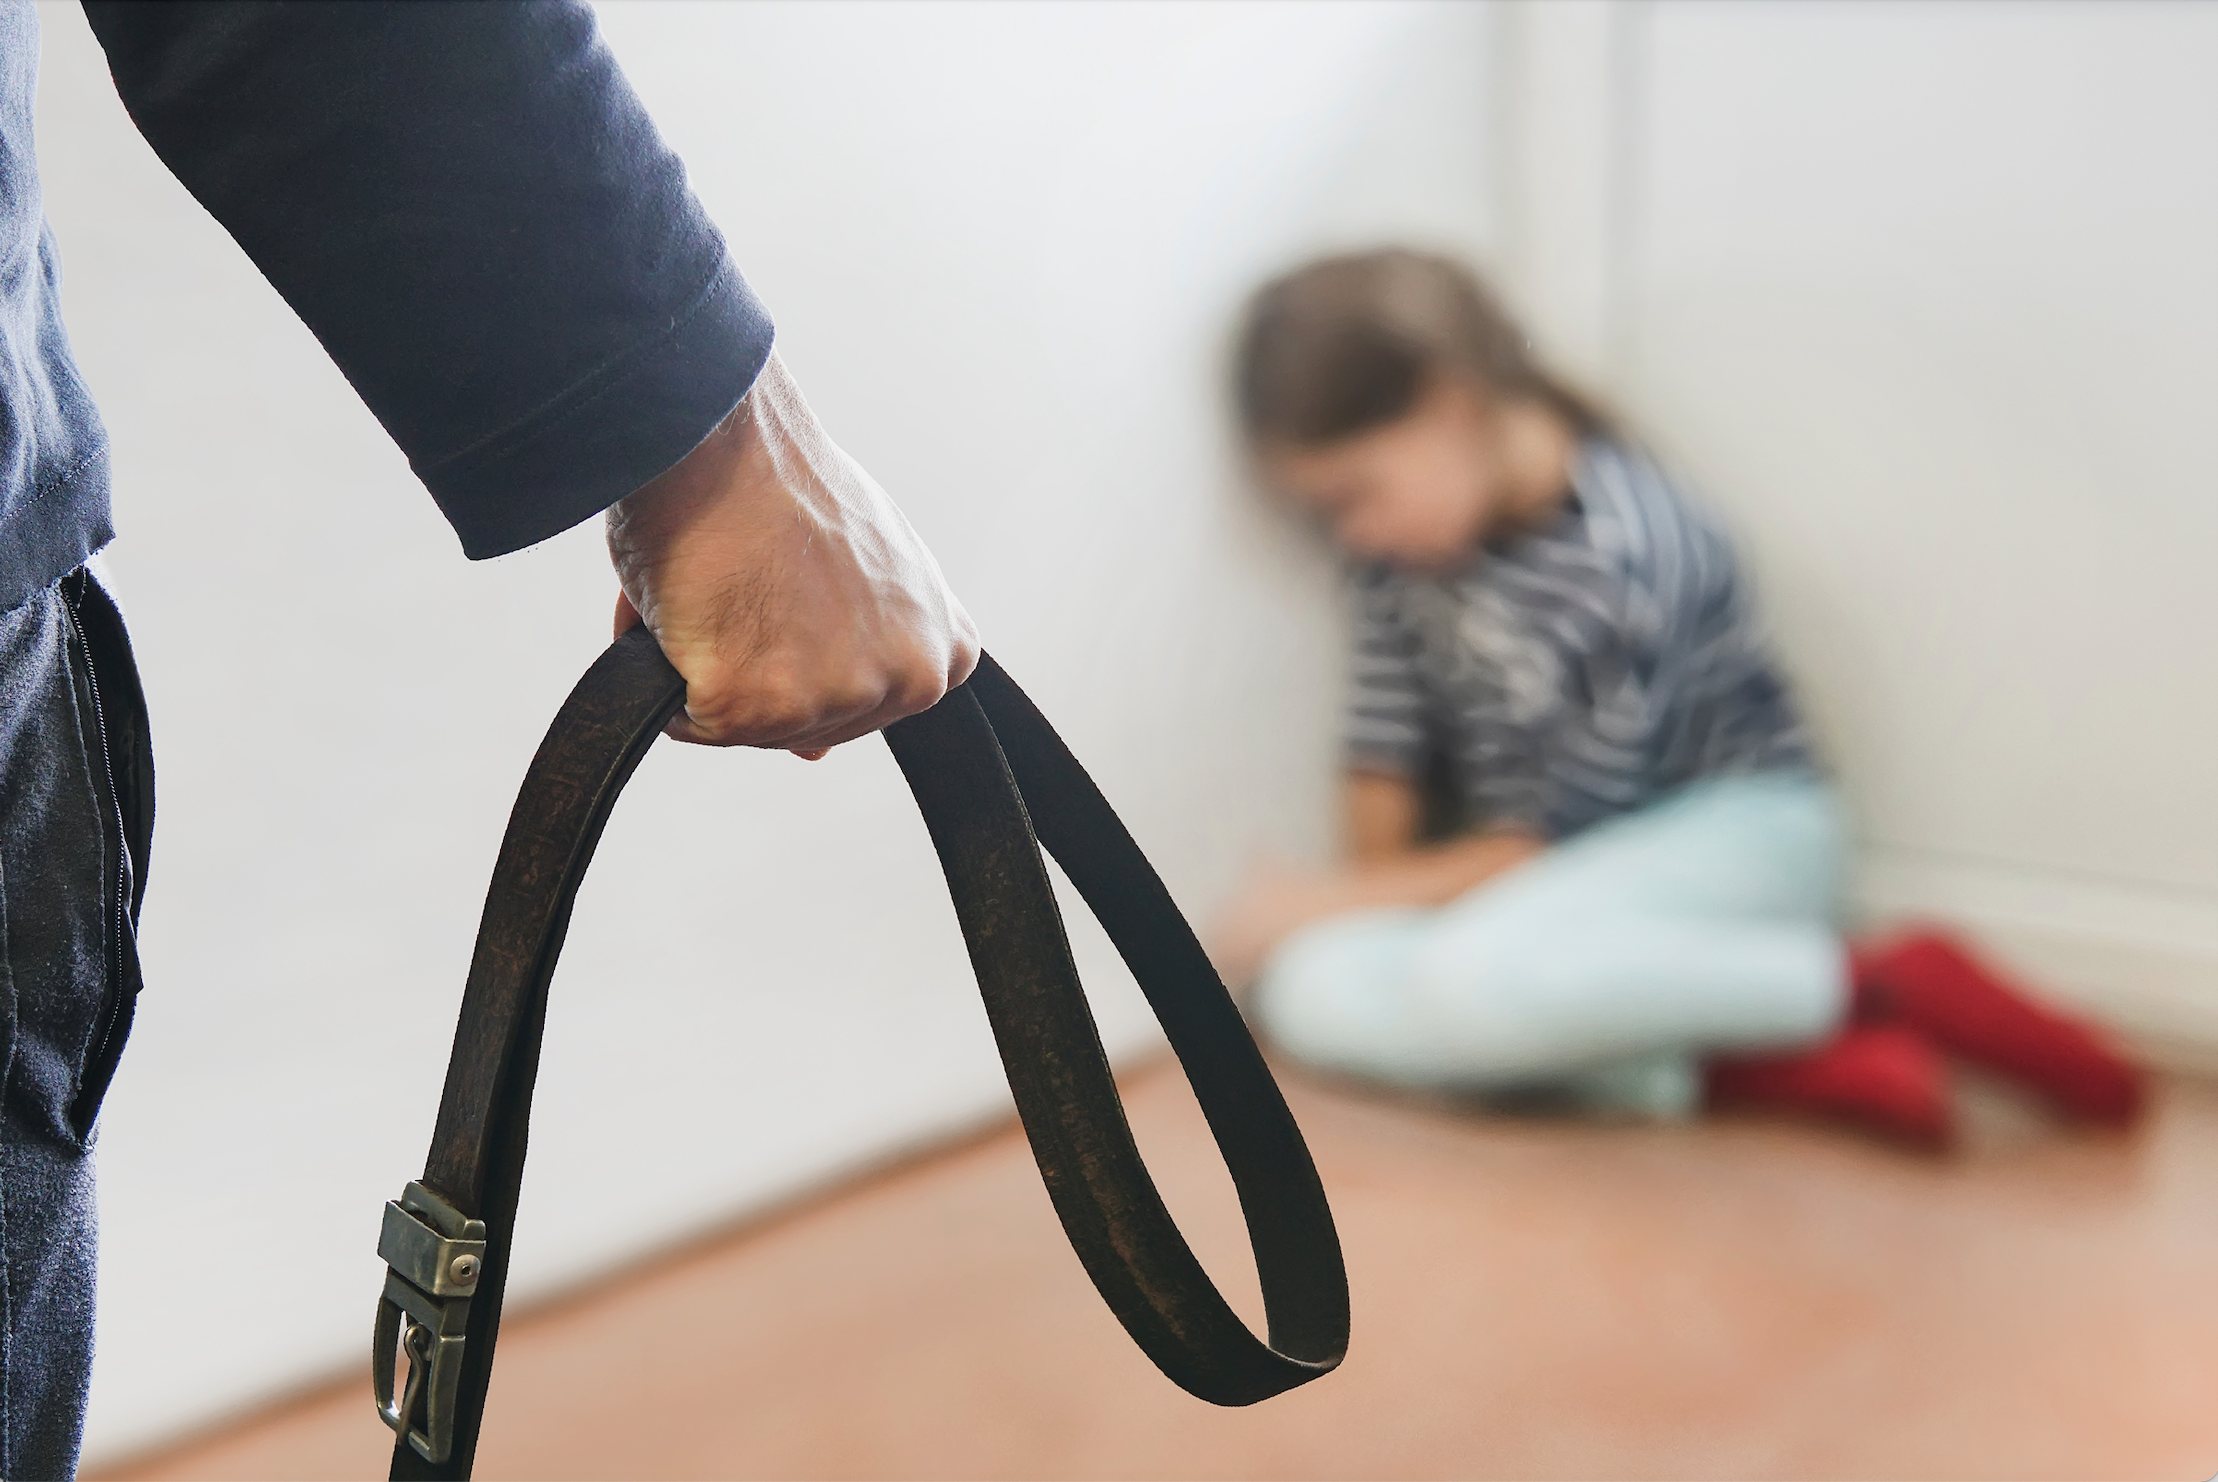 Is it OK to spank a misbehaving child once in a while?